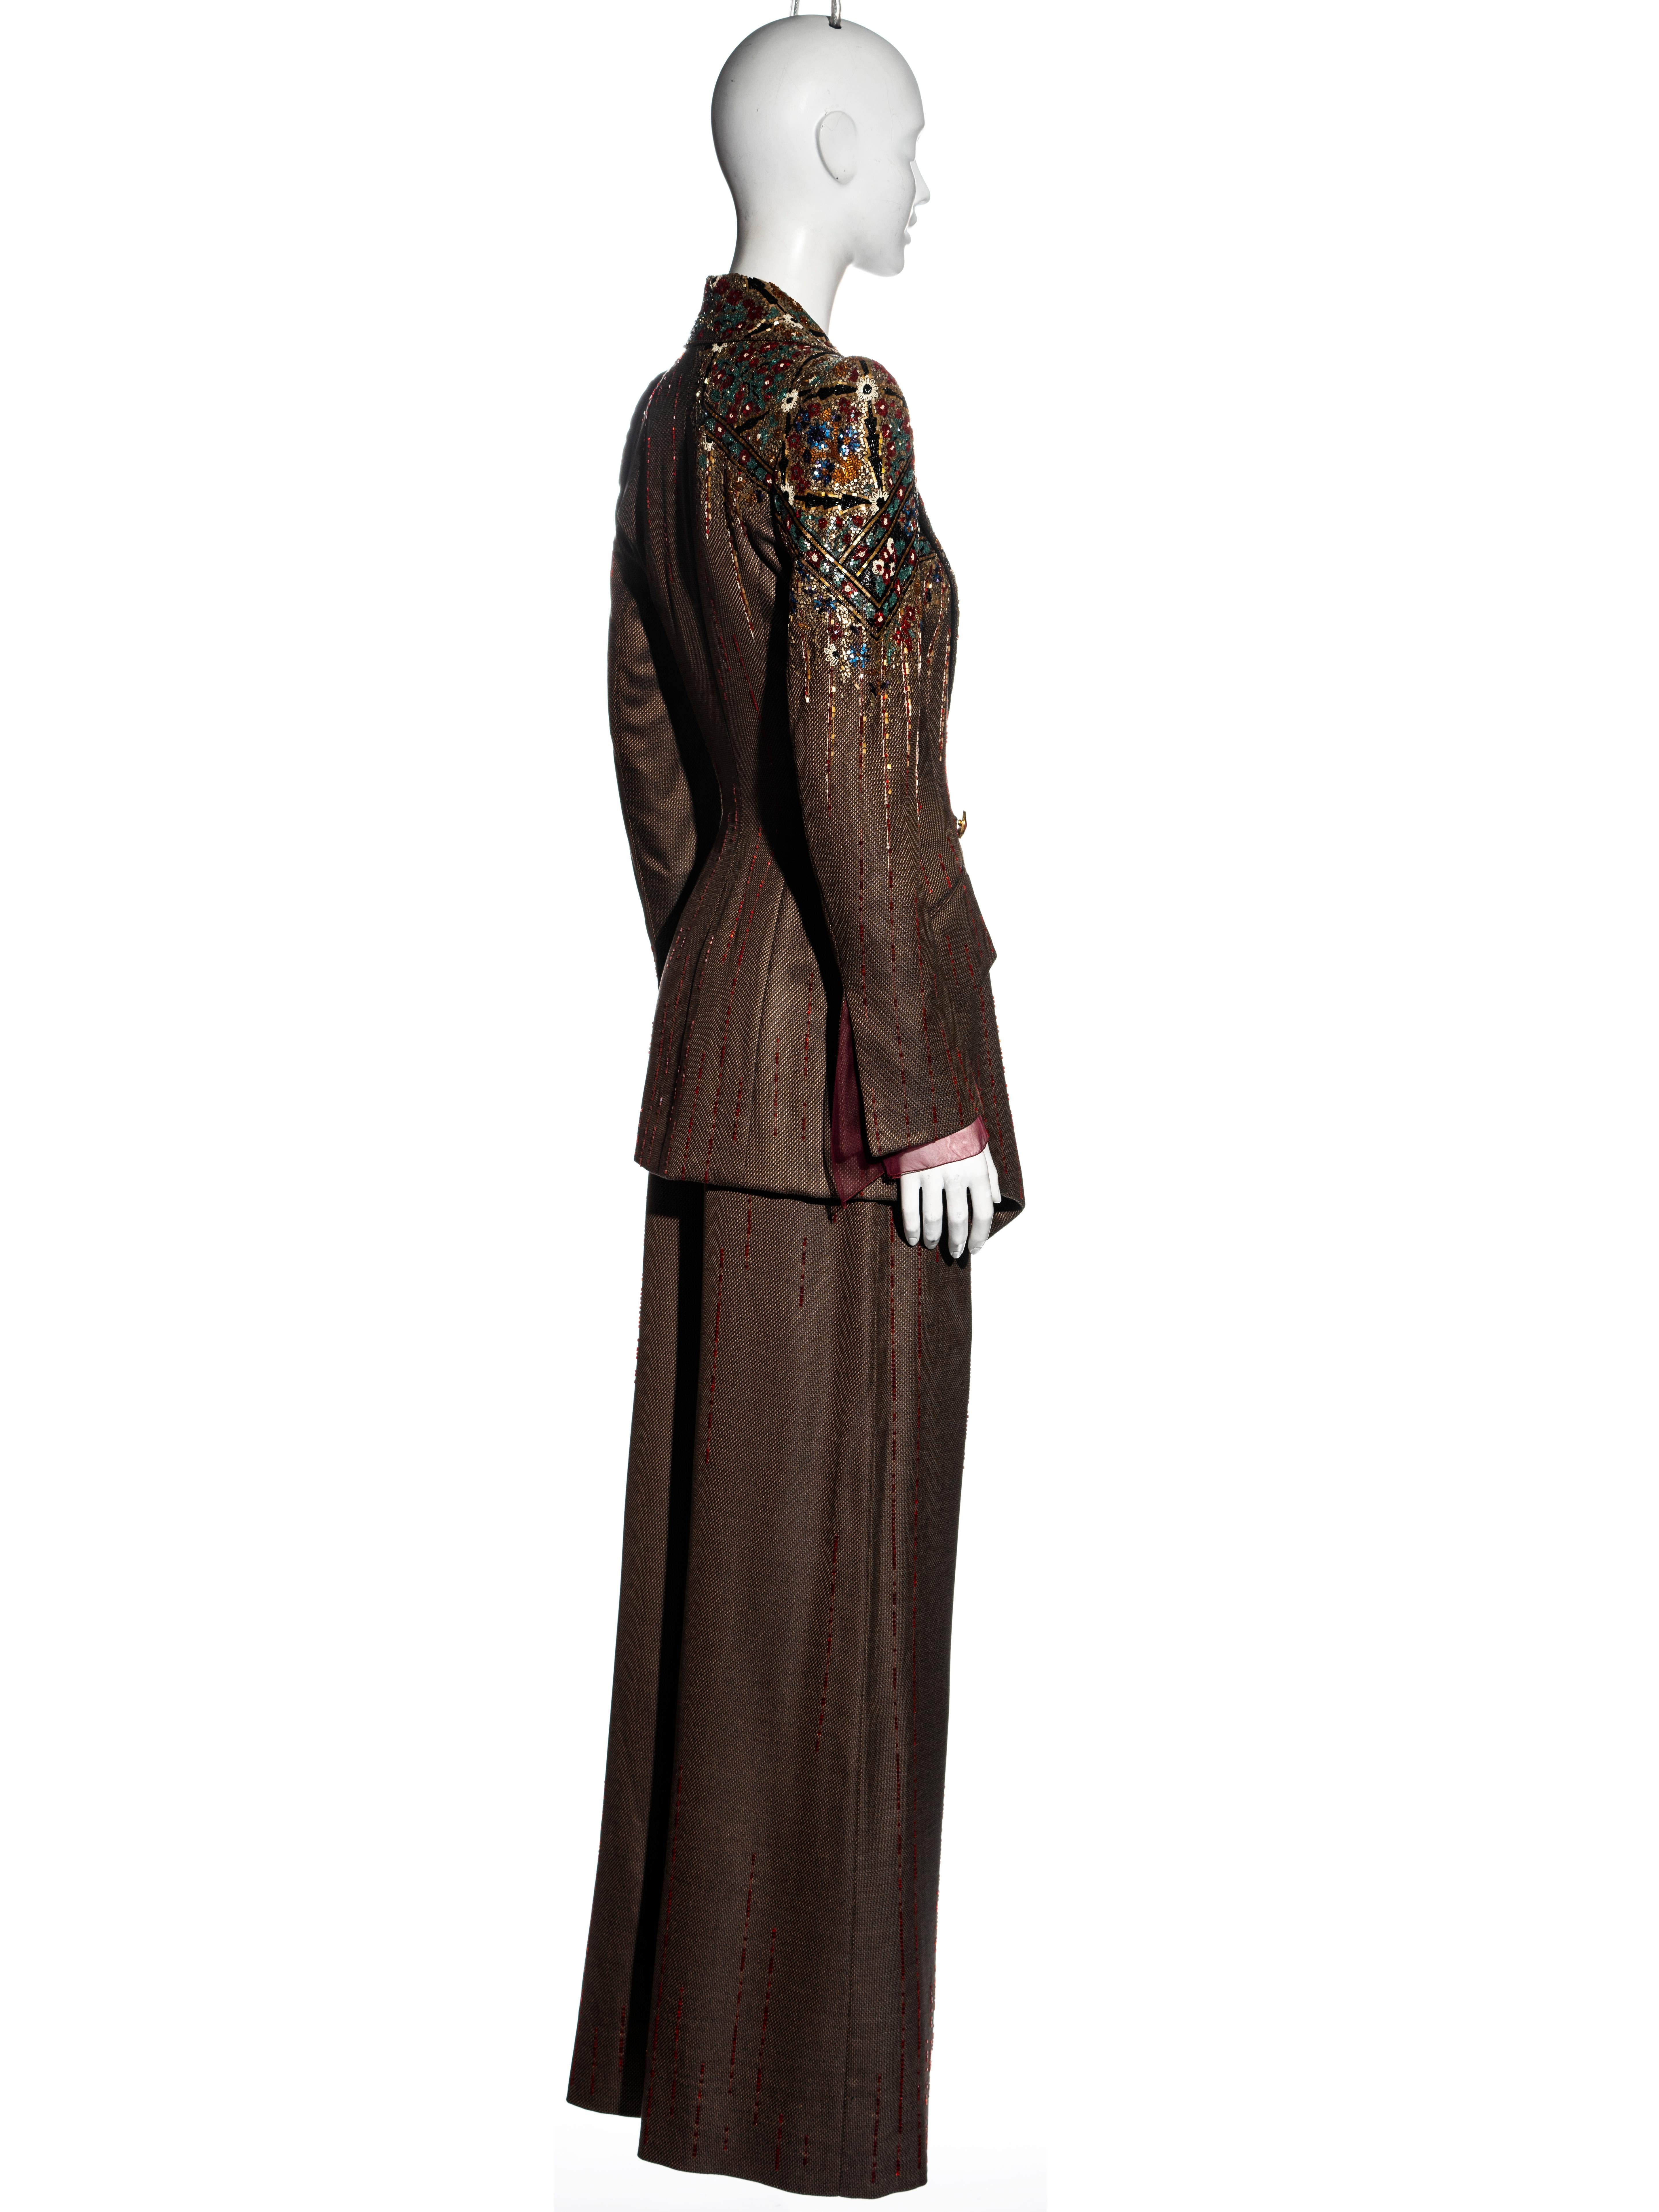 Jean-Louis Scherrer Haute Couture embellished brown wool pant suit, fw 2001 For Sale 4